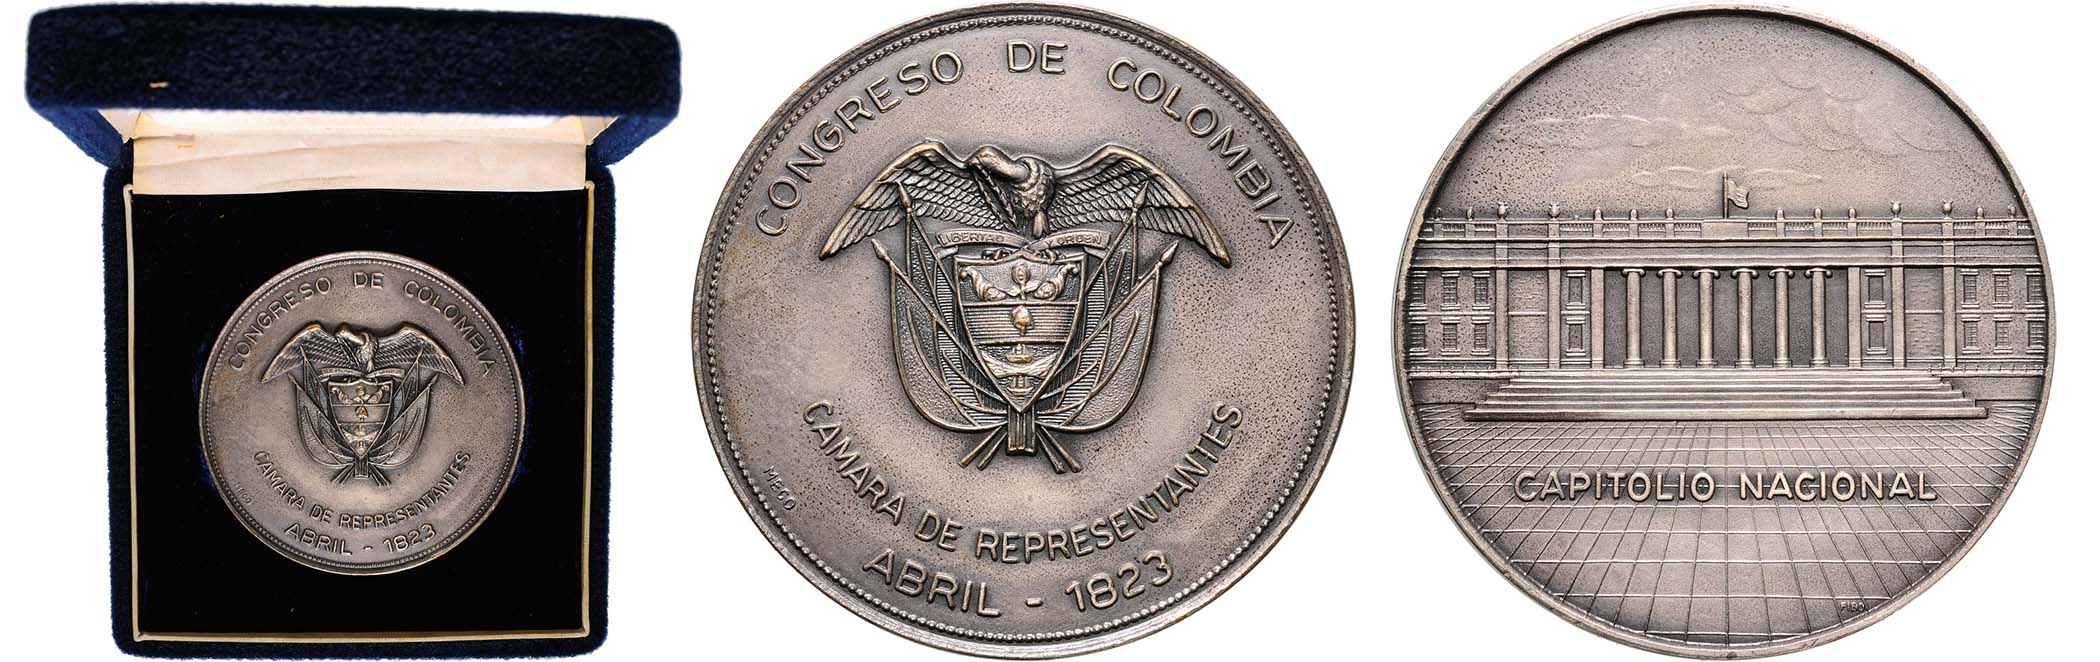 Colombian Congress Medal